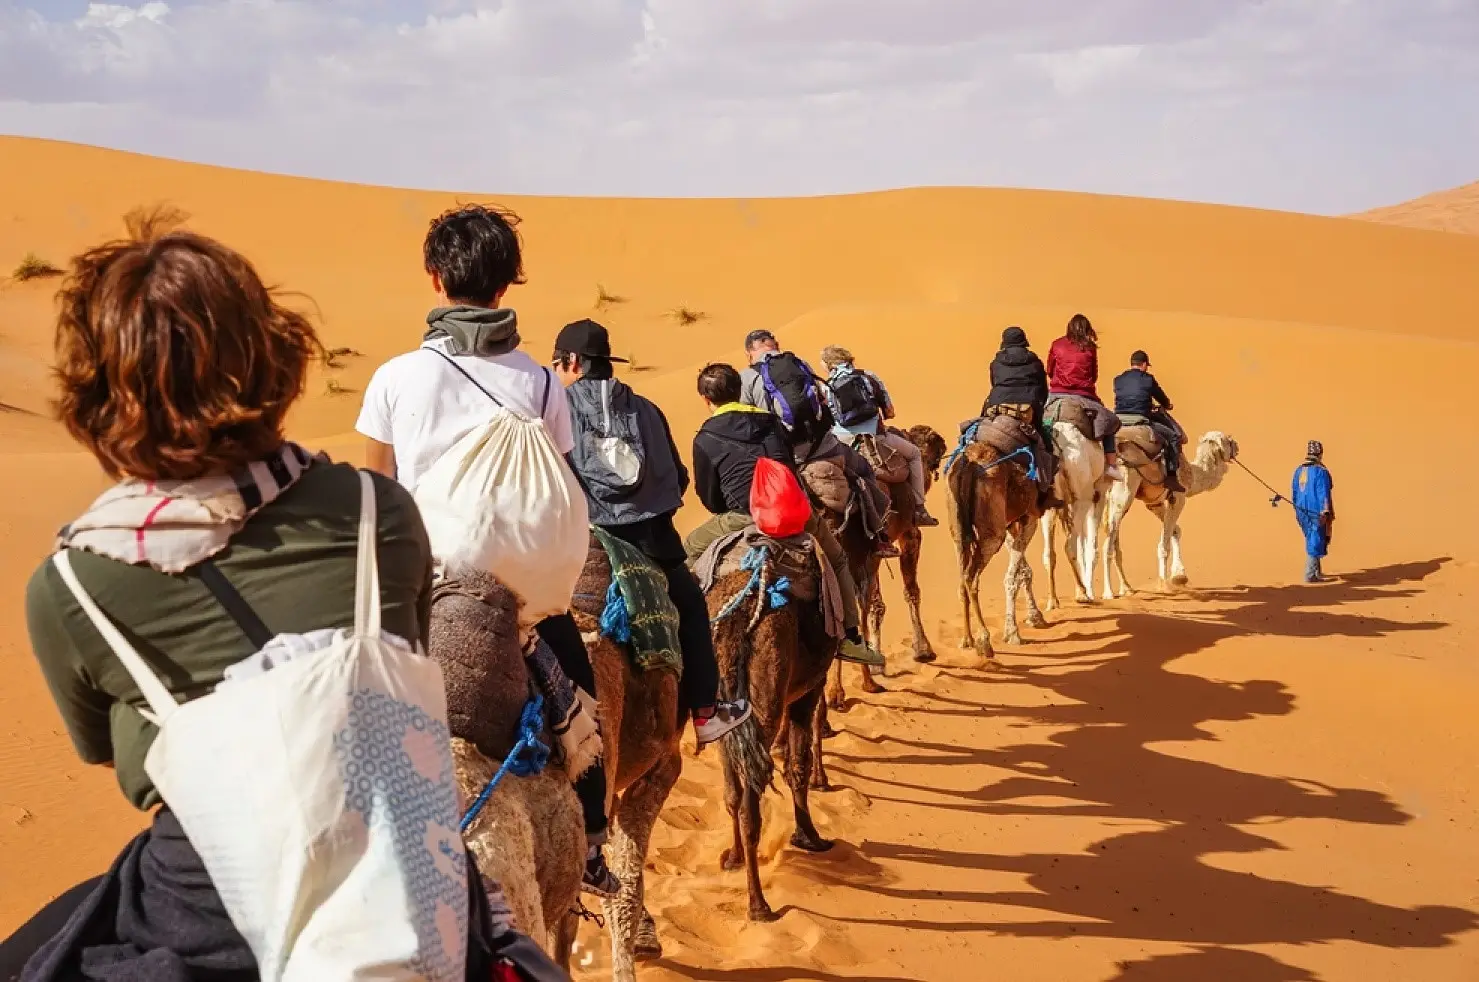 Where-to-Ride-Camels-in-Morocco-Merzouga.webp